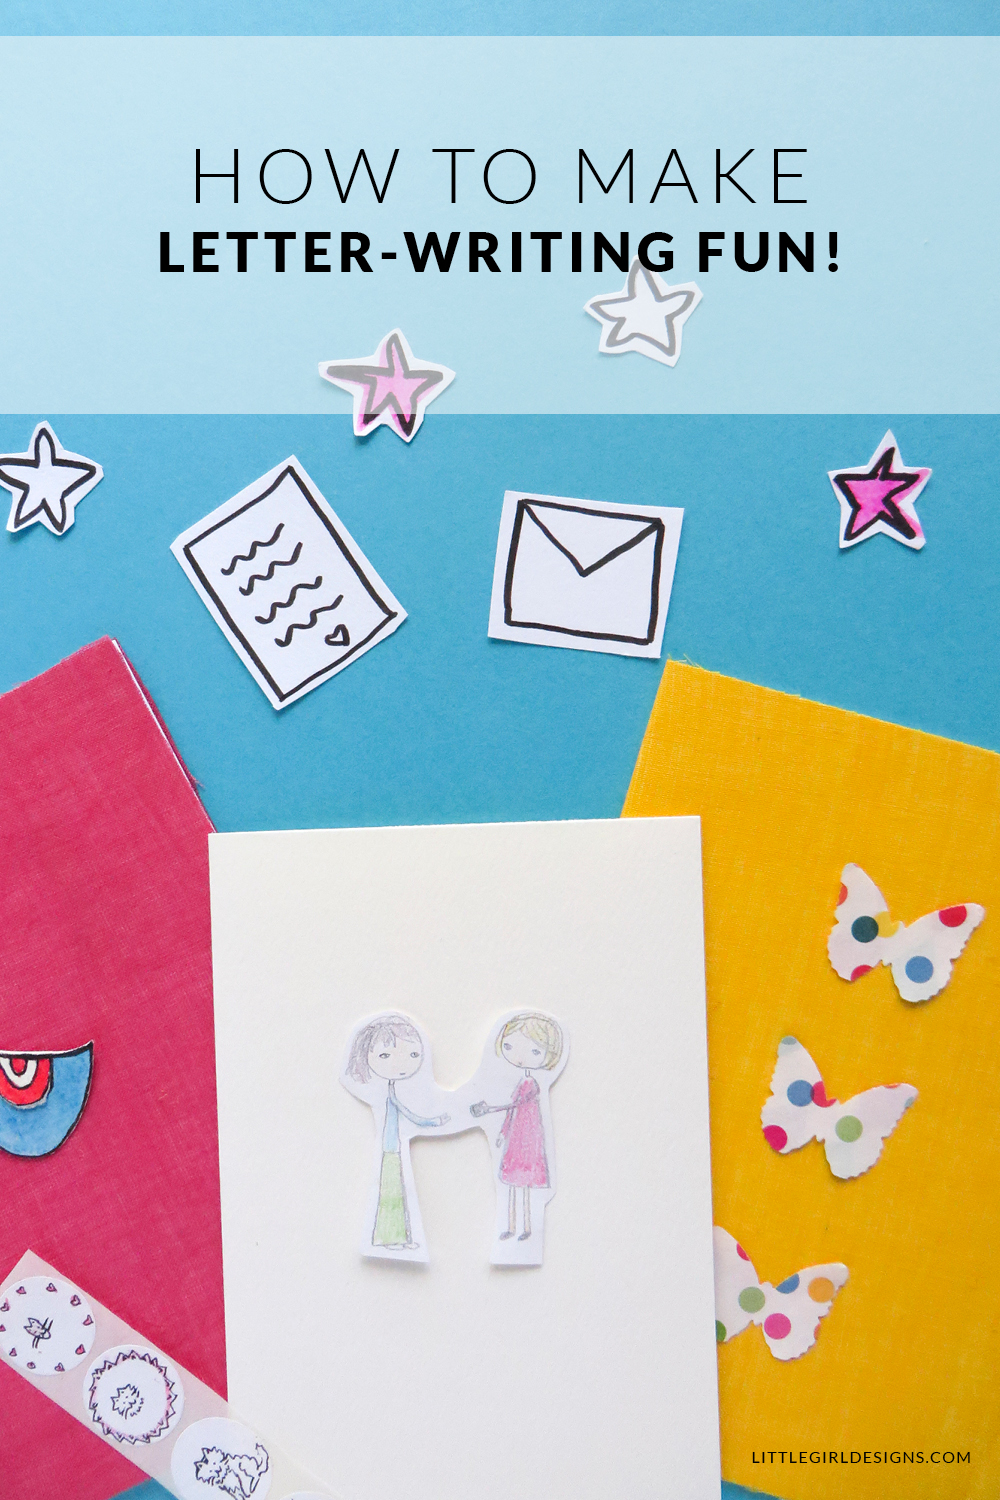 Make Letter-writing Fun With These Tips